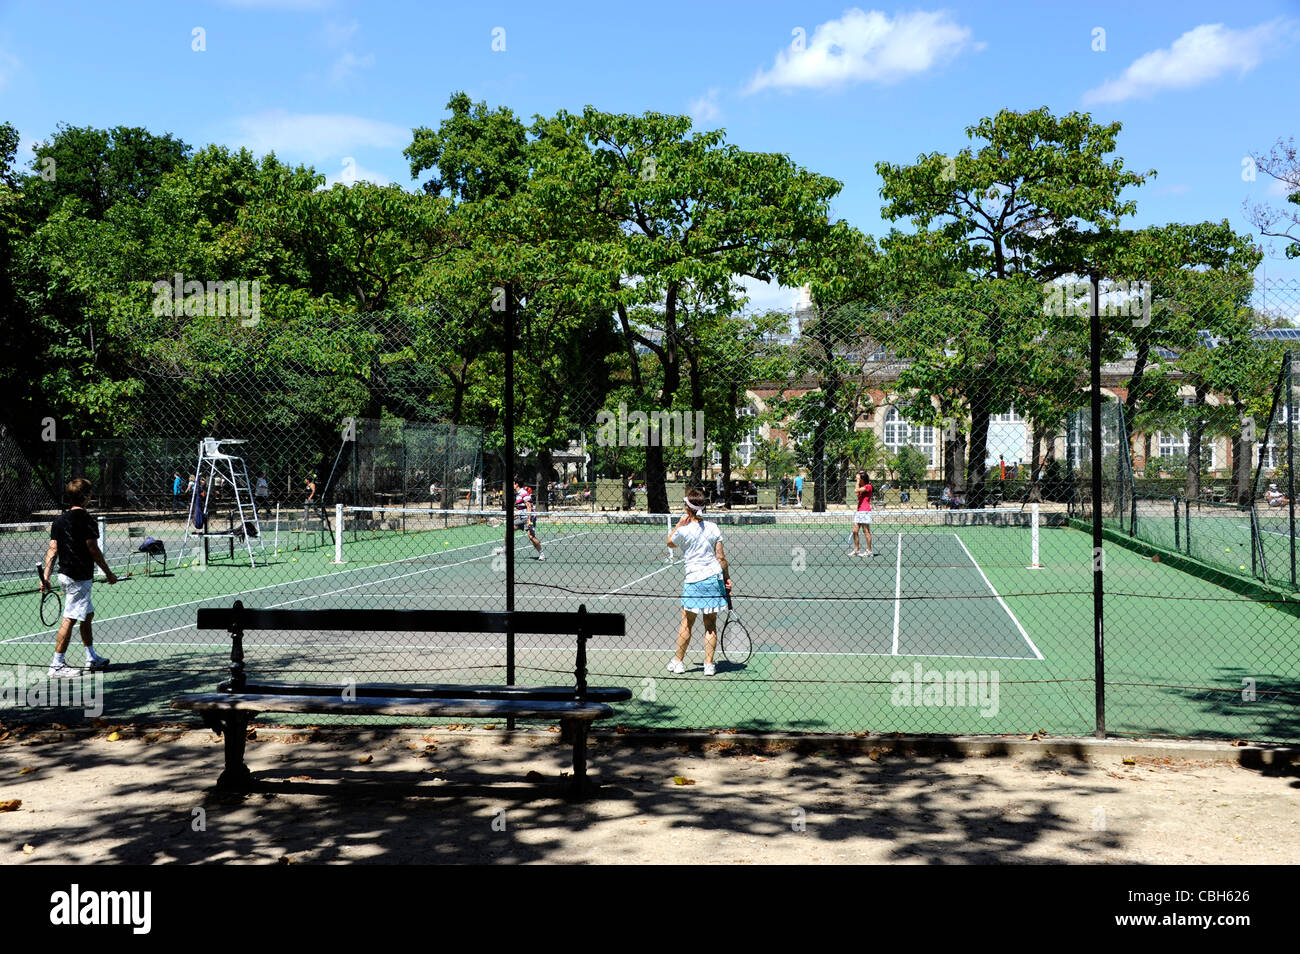 Tennis court in Luxembourg garden,Paris, France Stock Photo - Alamy